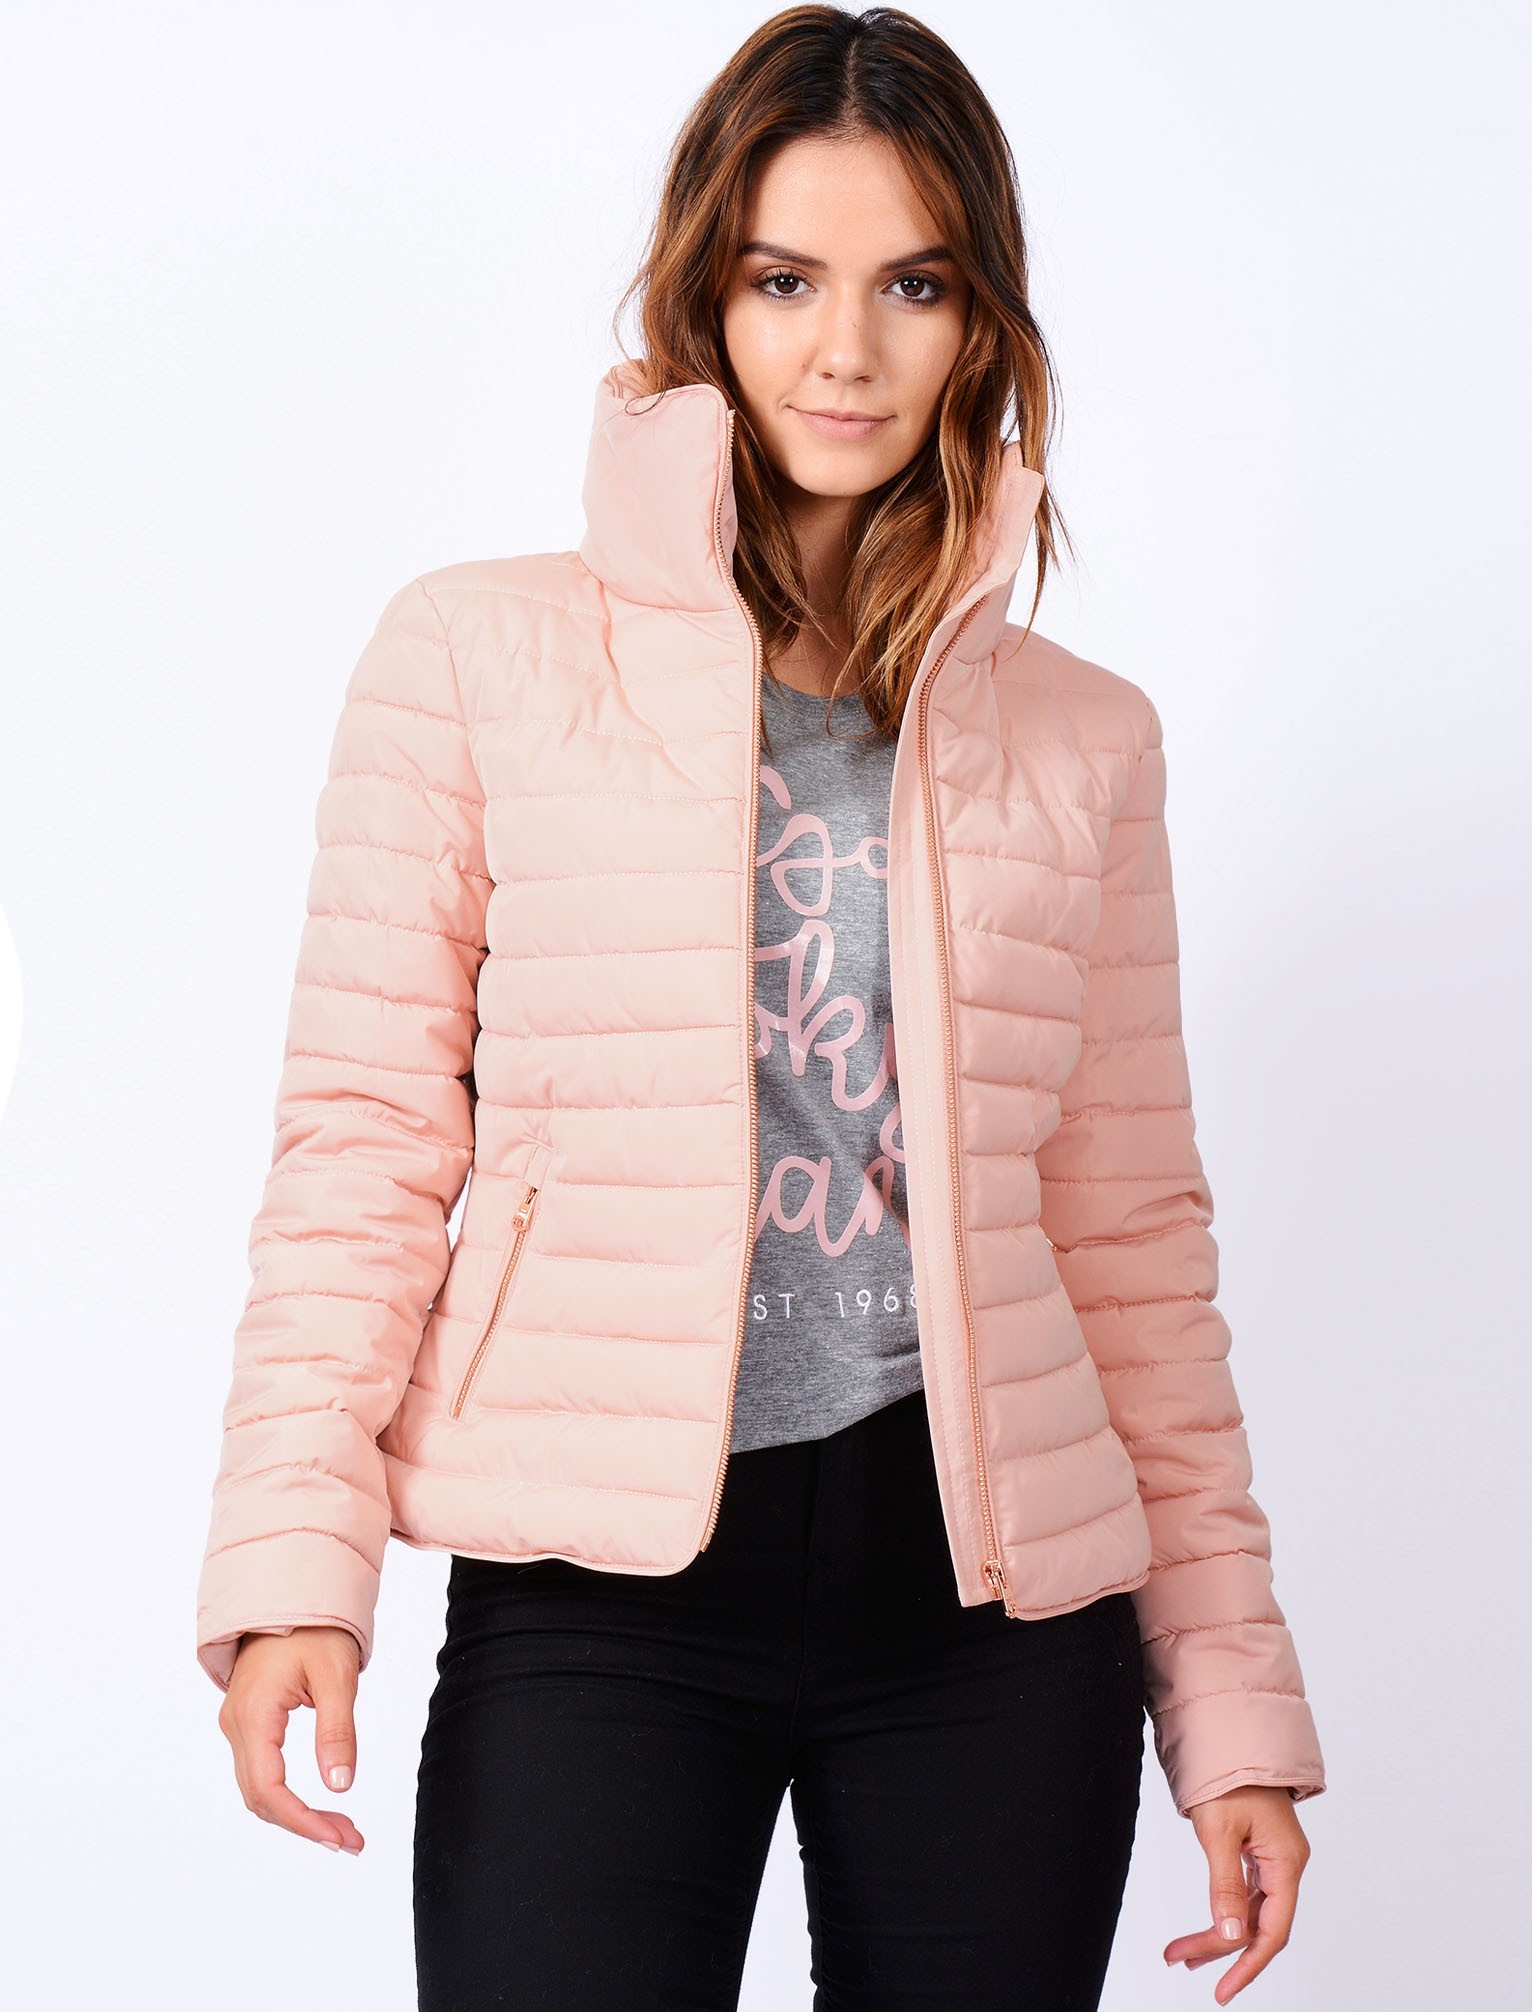 Women Model Pink Jacket Brown Eyes Smiling Standing Brunette Looking At Viewer White Background Blac 1532x2012